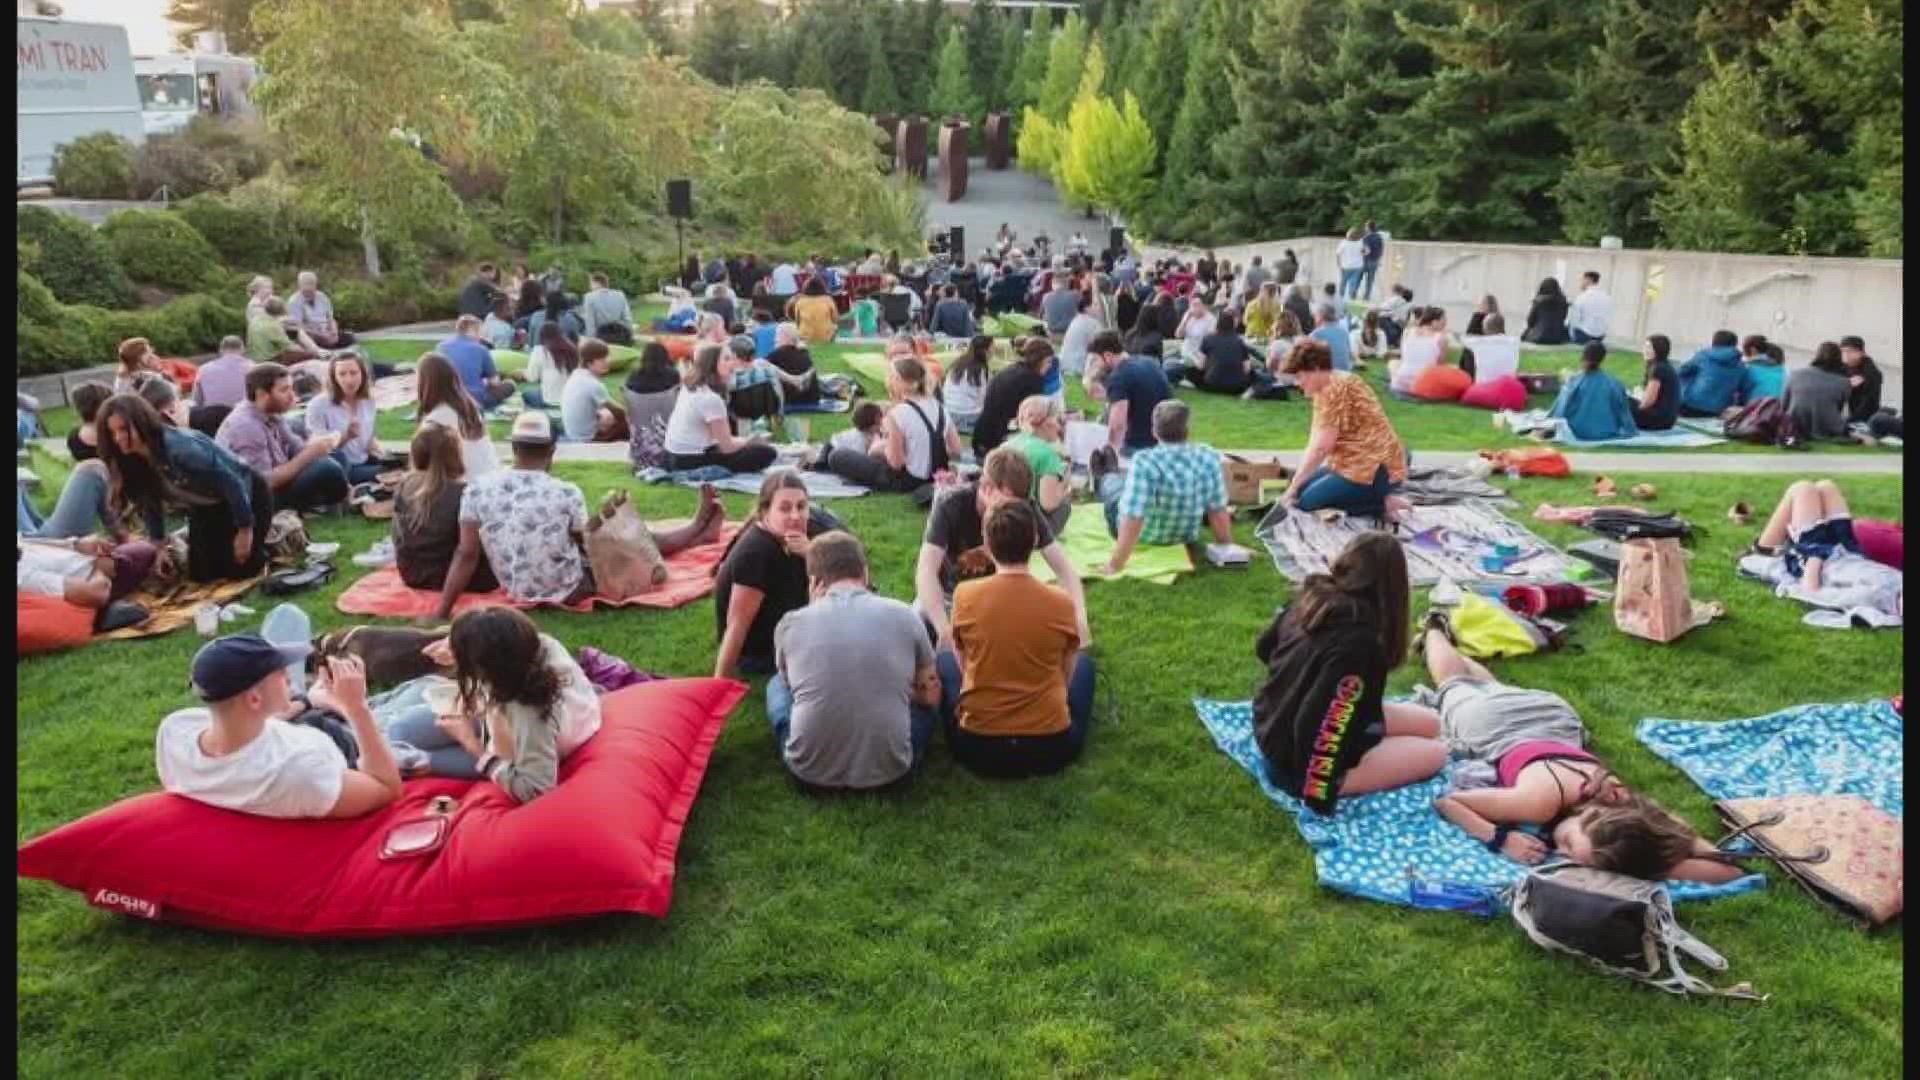 After a 2-year hiatus Summer at SAM is back in Seattle. Visitors can expect performances, art, music and food on Thursdays and Saturdays from now until August 20th.